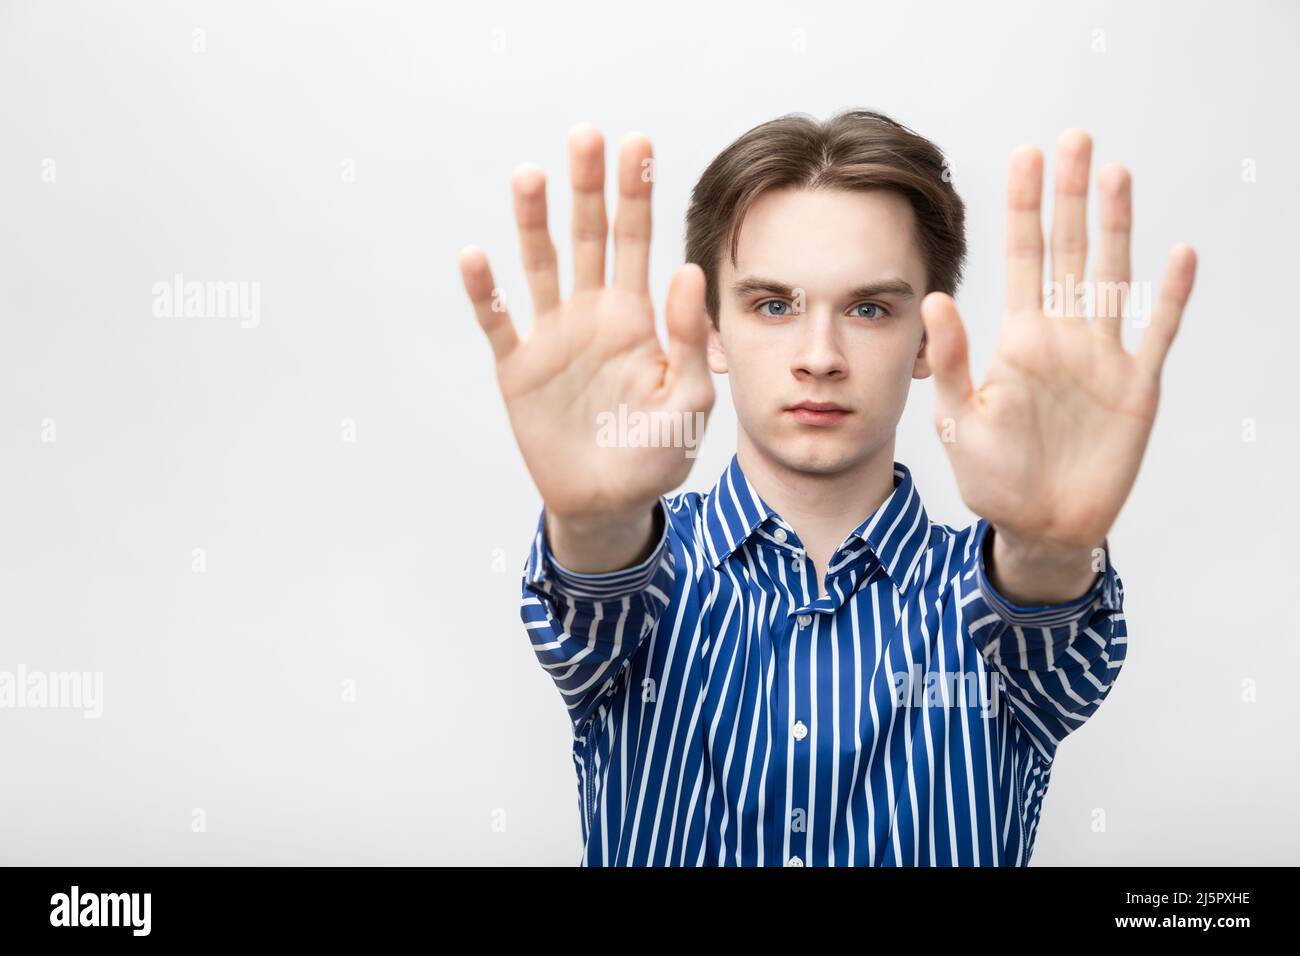 Stop hand gesture. Annoyed young man with hands up Photos